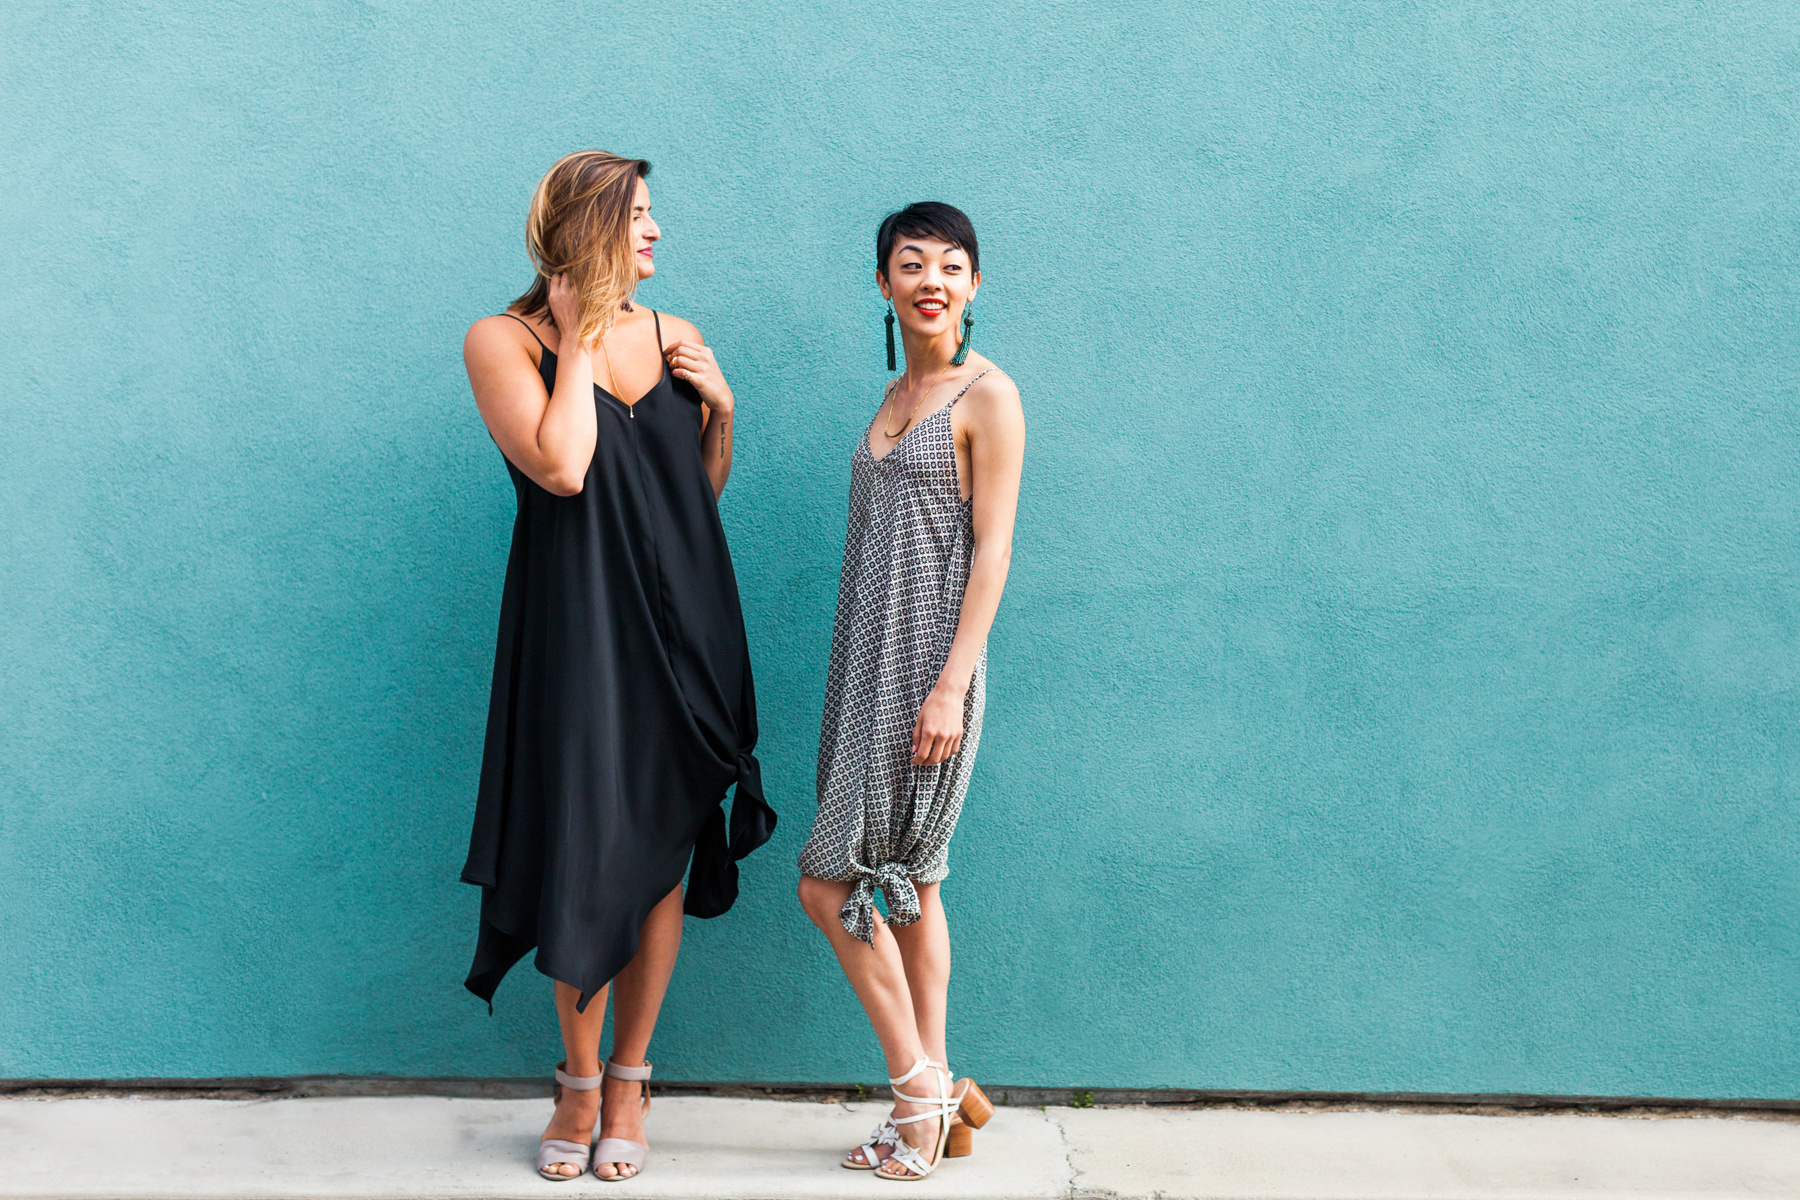  Season creates sustainable silk dresses, handmade in the USA for your eco-friendly capsule wardrobe.    